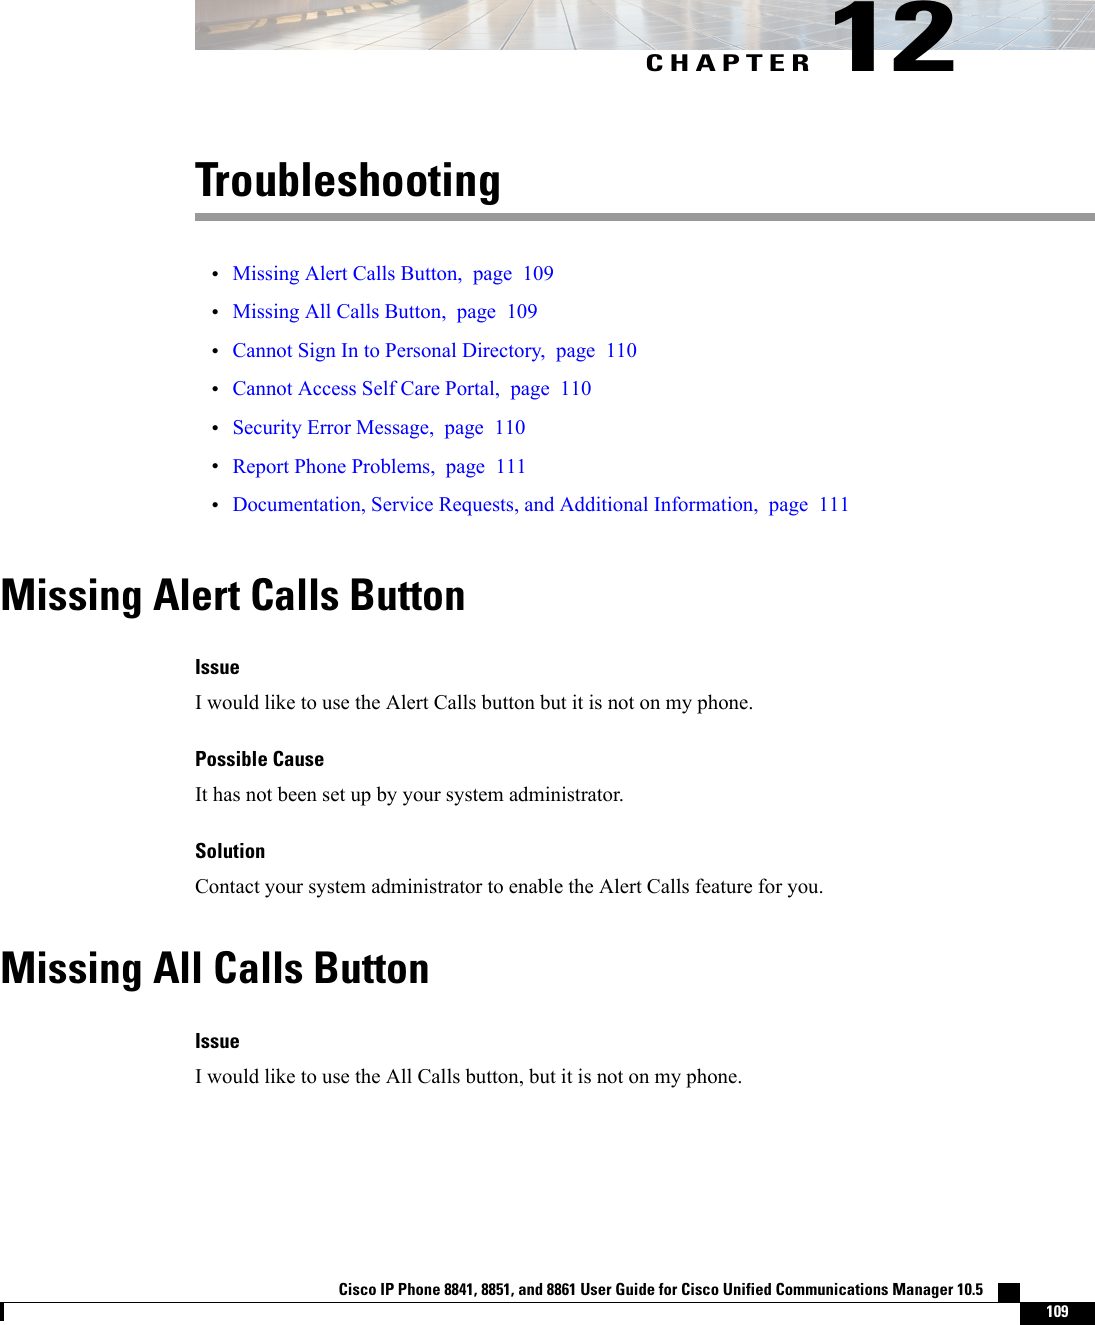 CHAPTER 12Troubleshooting•Missing Alert Calls Button, page 109•Missing All Calls Button, page 109•Cannot Sign In to Personal Directory, page 110•Cannot Access Self Care Portal, page 110•Security Error Message, page 110•Report Phone Problems, page 111•Documentation, Service Requests, and Additional Information, page 111Missing Alert Calls ButtonIssueI would like to use the Alert Calls button but it is not on my phone.Possible CauseIt has not been set up by your system administrator.SolutionContact your system administrator to enable the Alert Calls feature for you.Missing All Calls ButtonIssueI would like to use the All Calls button, but it is not on my phone.Cisco IP Phone 8841, 8851, and 8861 User Guide for Cisco Unified Communications Manager 10.5    109